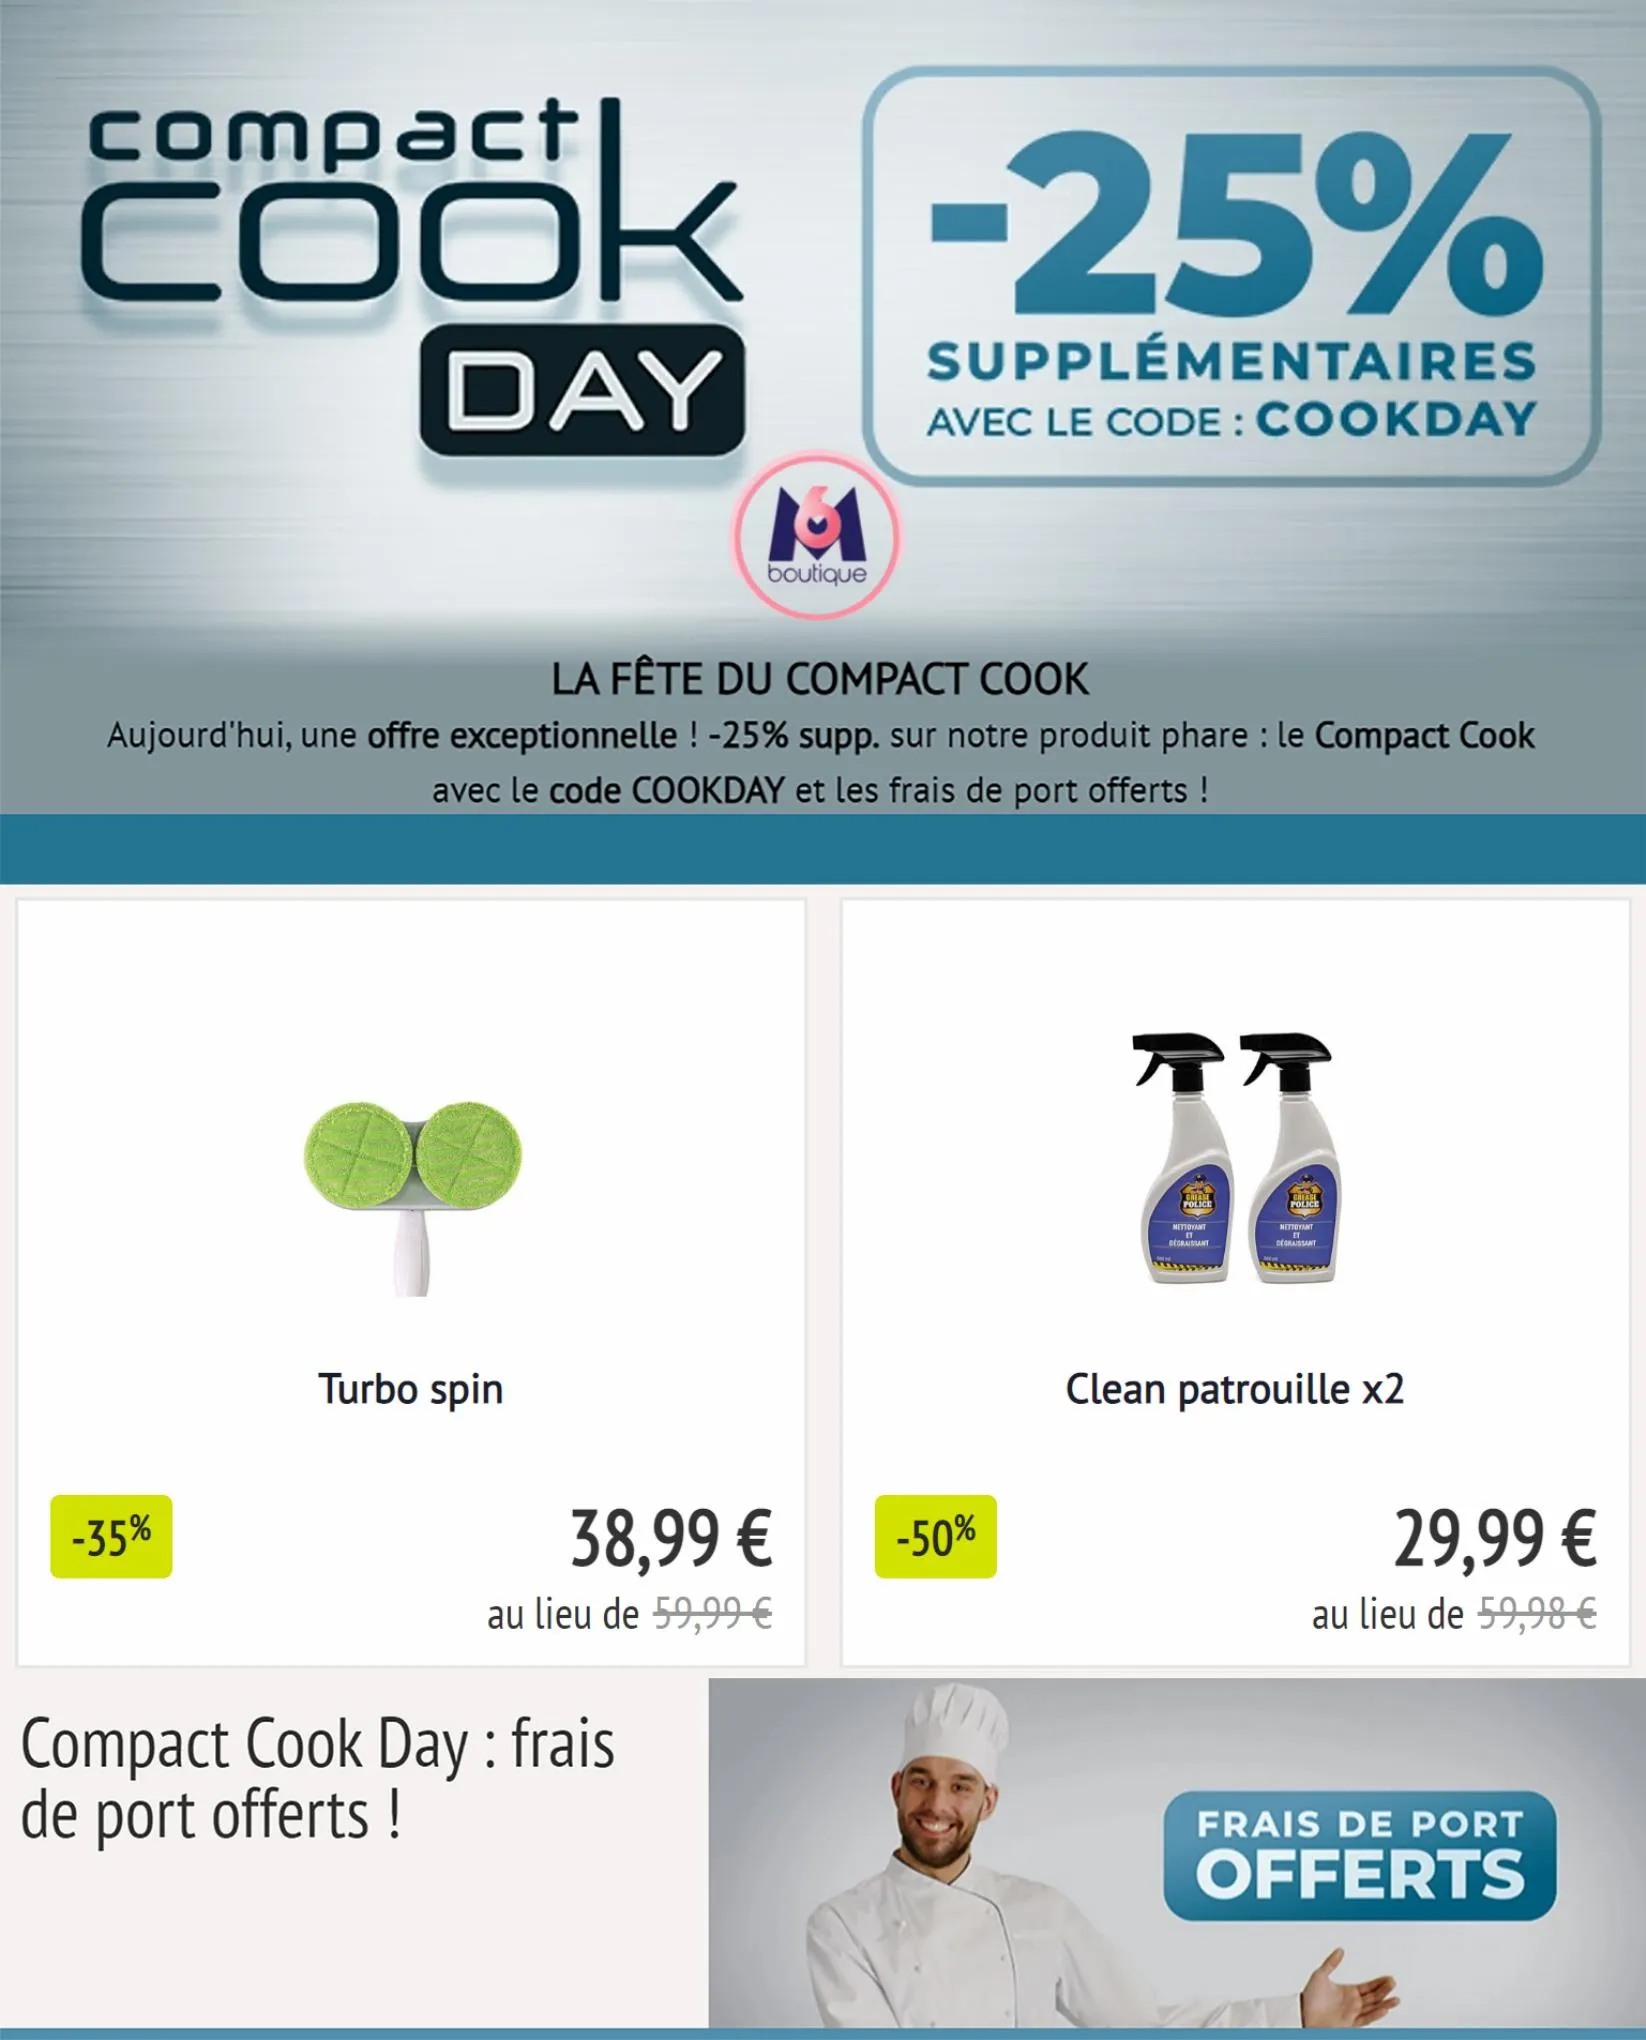 Catalogue COOKDAY -25% supplémentaires!, page 00001